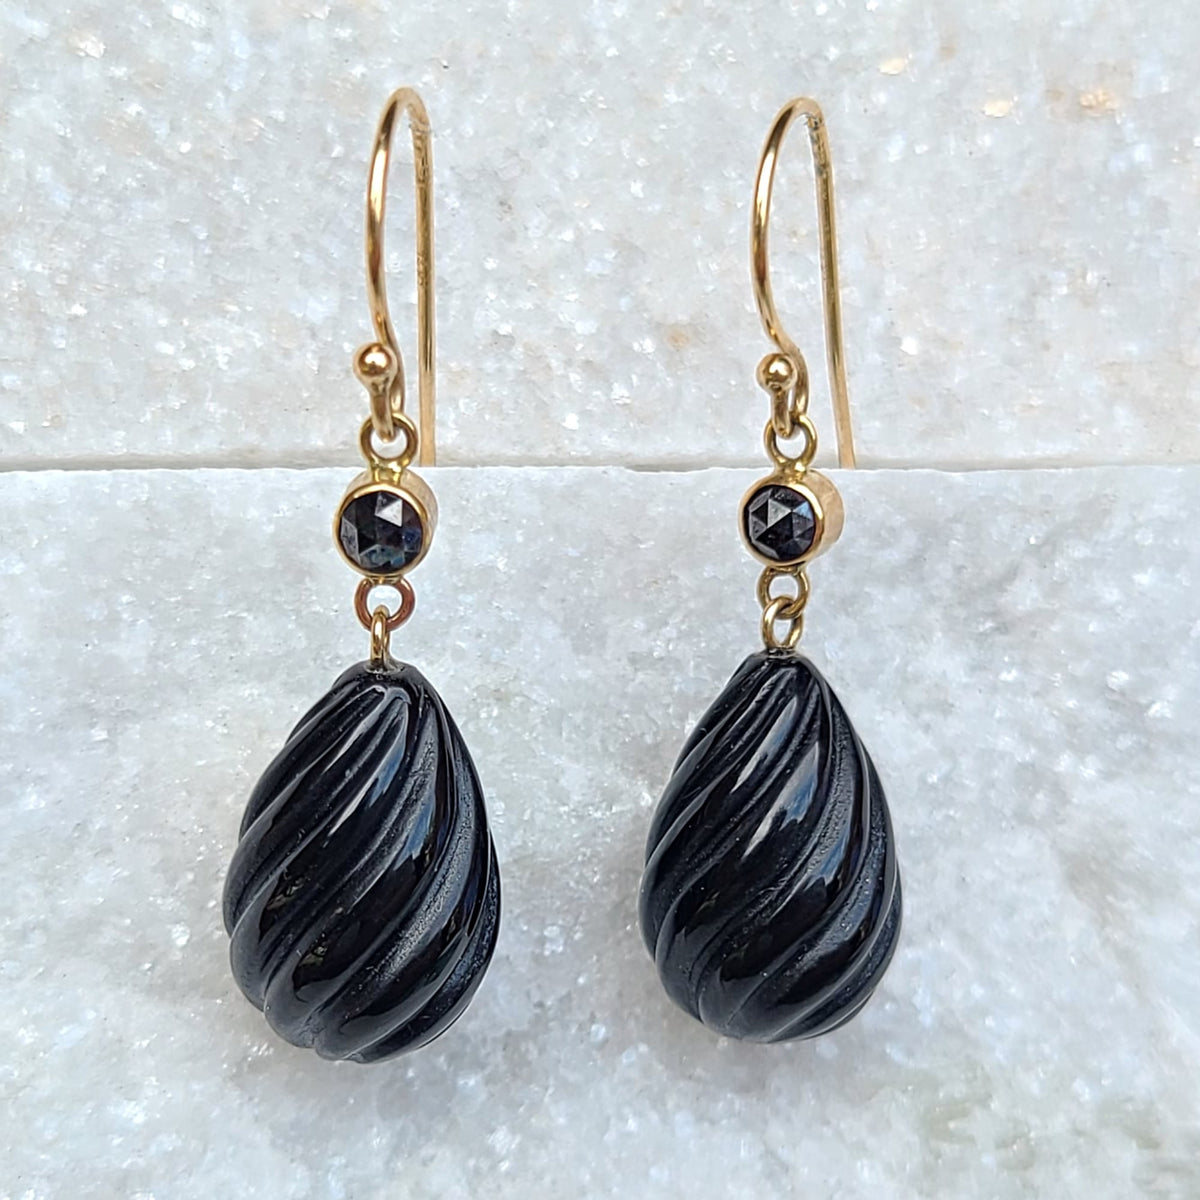 Sincerely Ginger Jewelry 14K Onyx Earrings with Black Diamond Accents